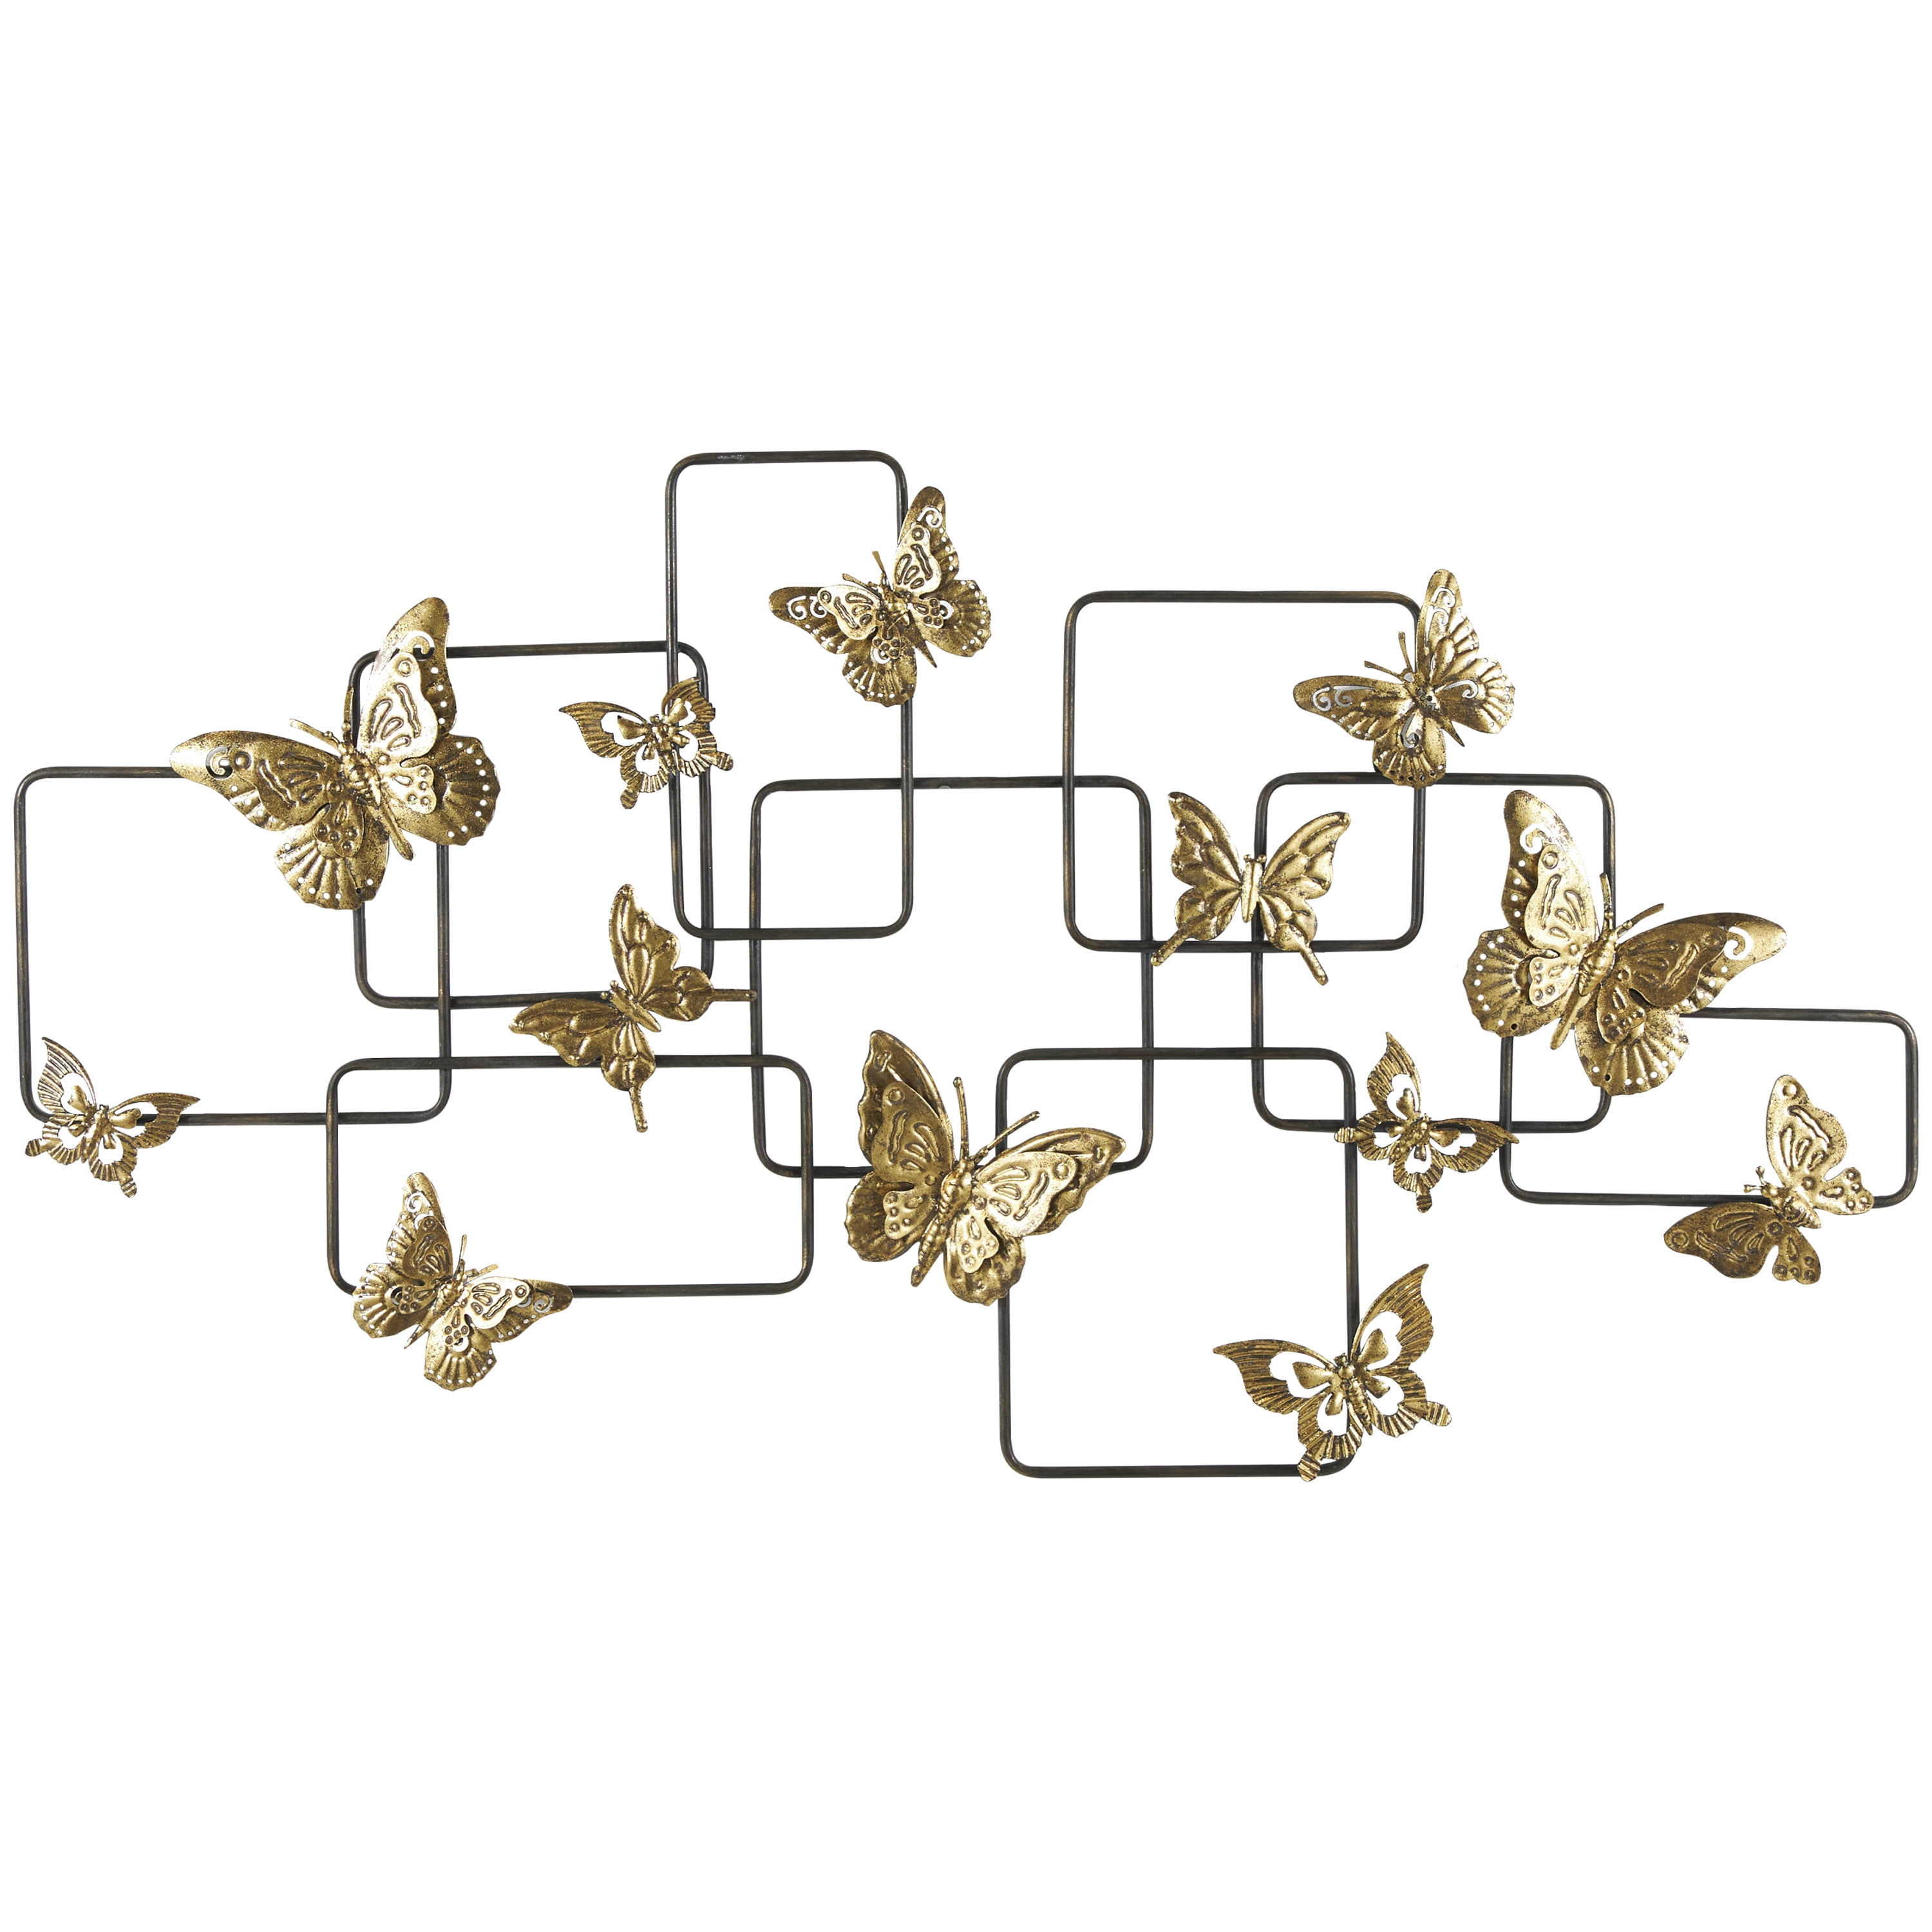 Decmode Gold Metal Butterfly Wall Decor with Black Open Rectangles, Size: 42L x 2W x 23H Inches